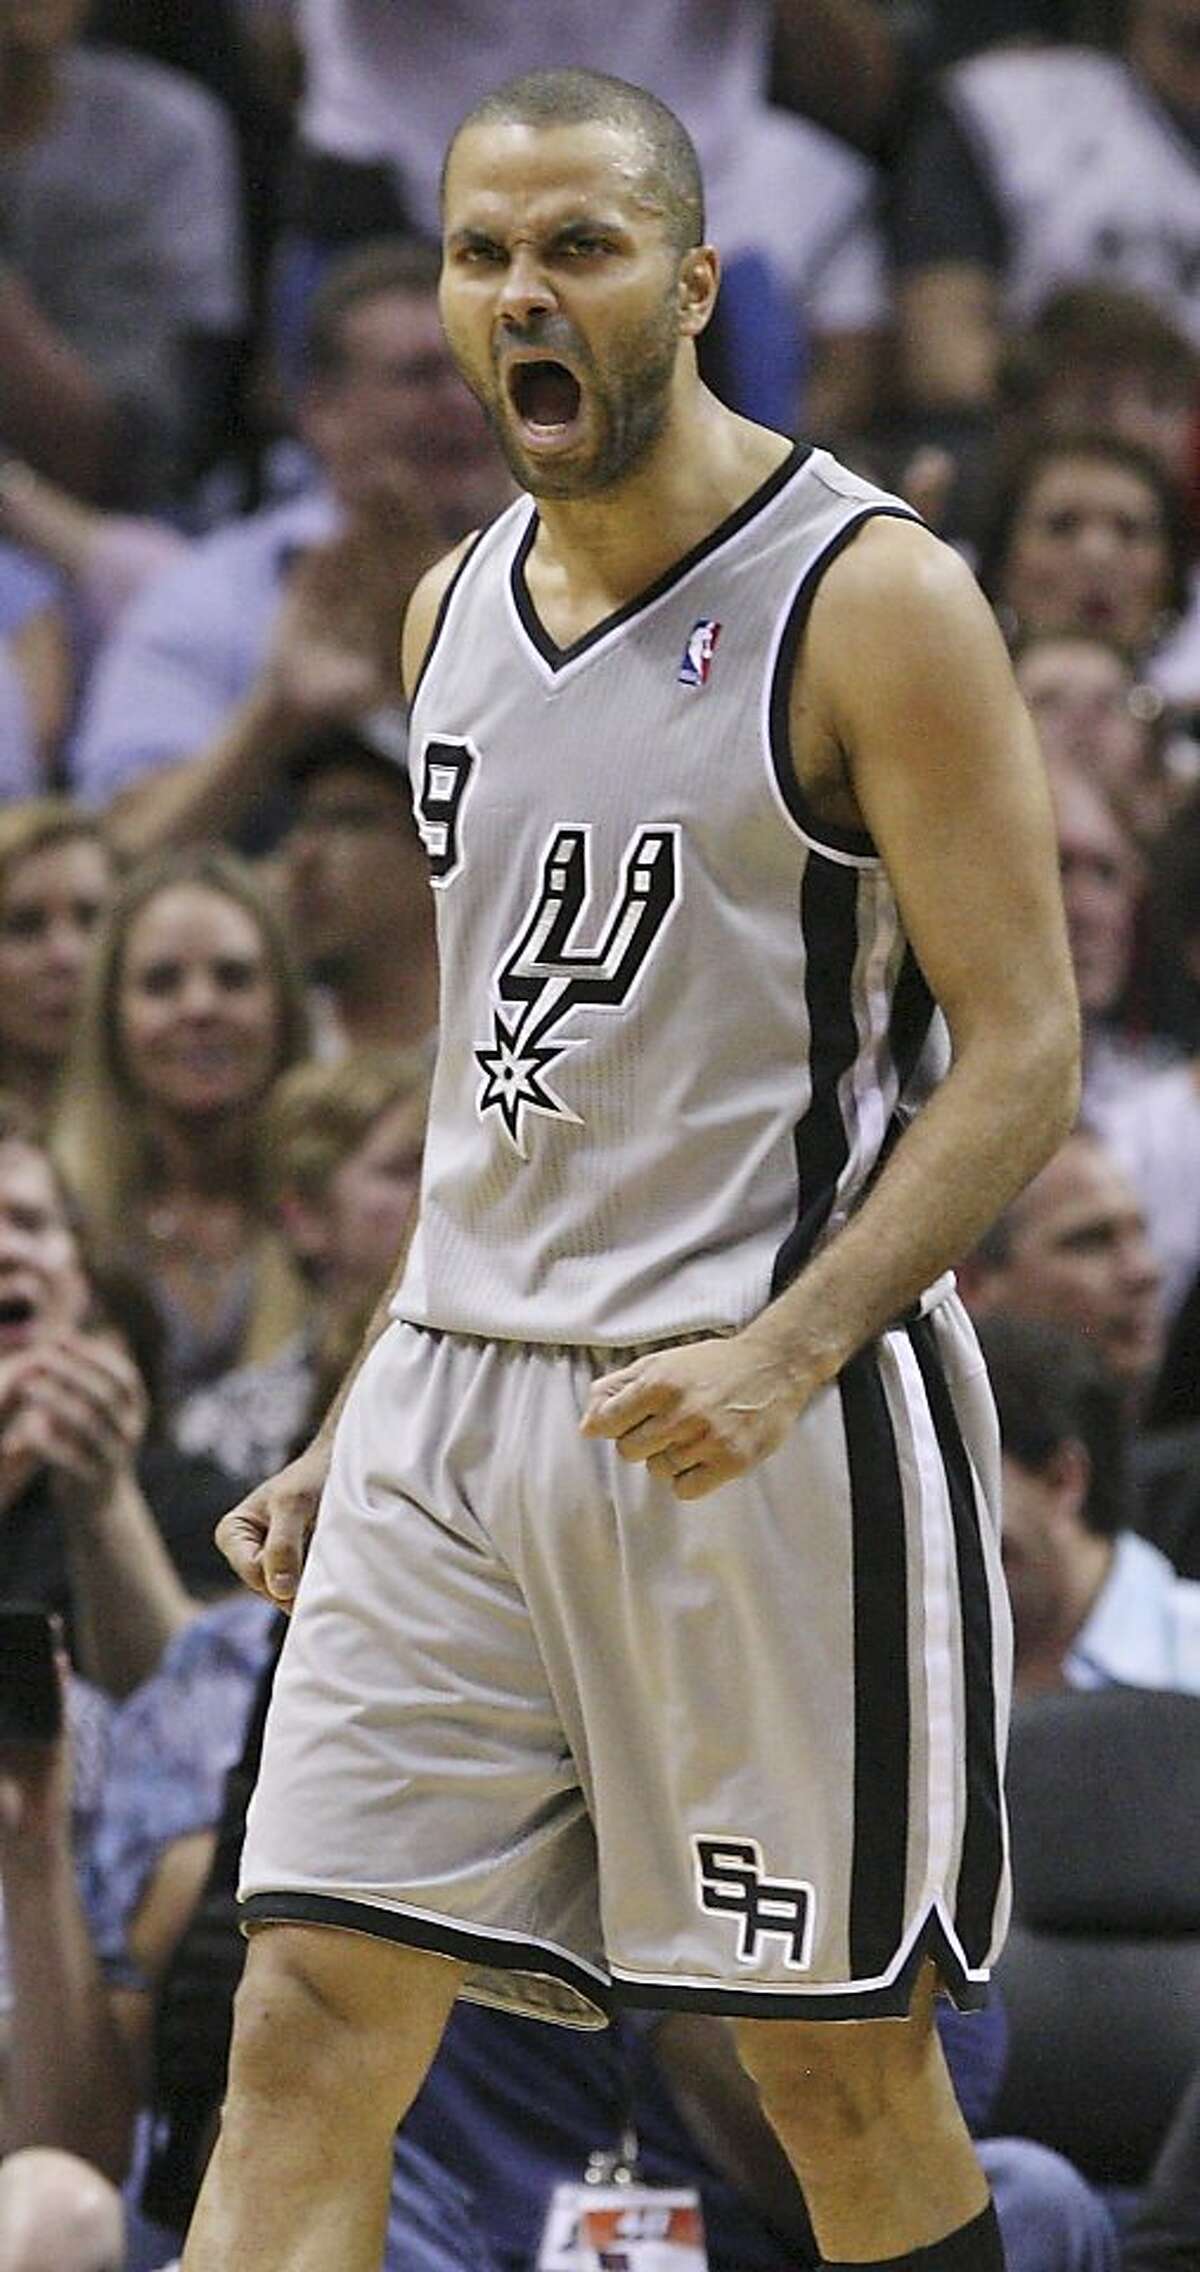 San Antonio Spurs' Tony Parker reacts after a play during second half action of Game 5 in the NBA Western Conference semifinals against the Golden State Warriors Tuesday May 14, 2013 at the AT&T Center. The Spurs won 109-91.